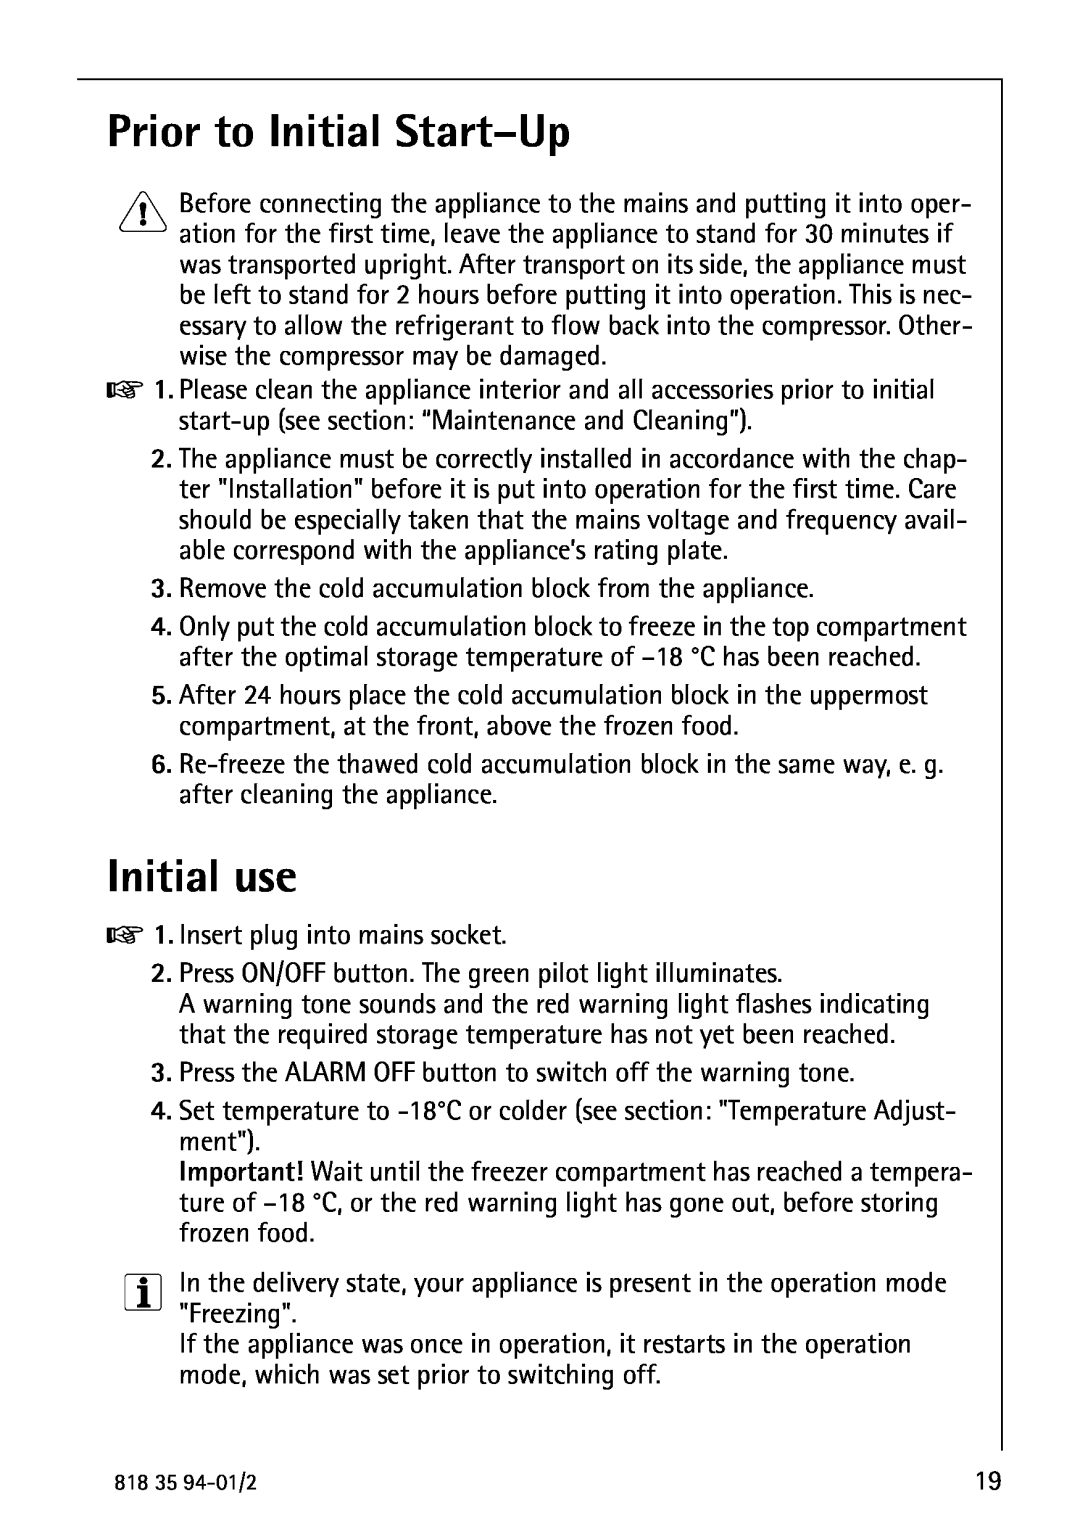 Electrolux U31462 operating instructions Prior to Initial Start-Up, Initial use 